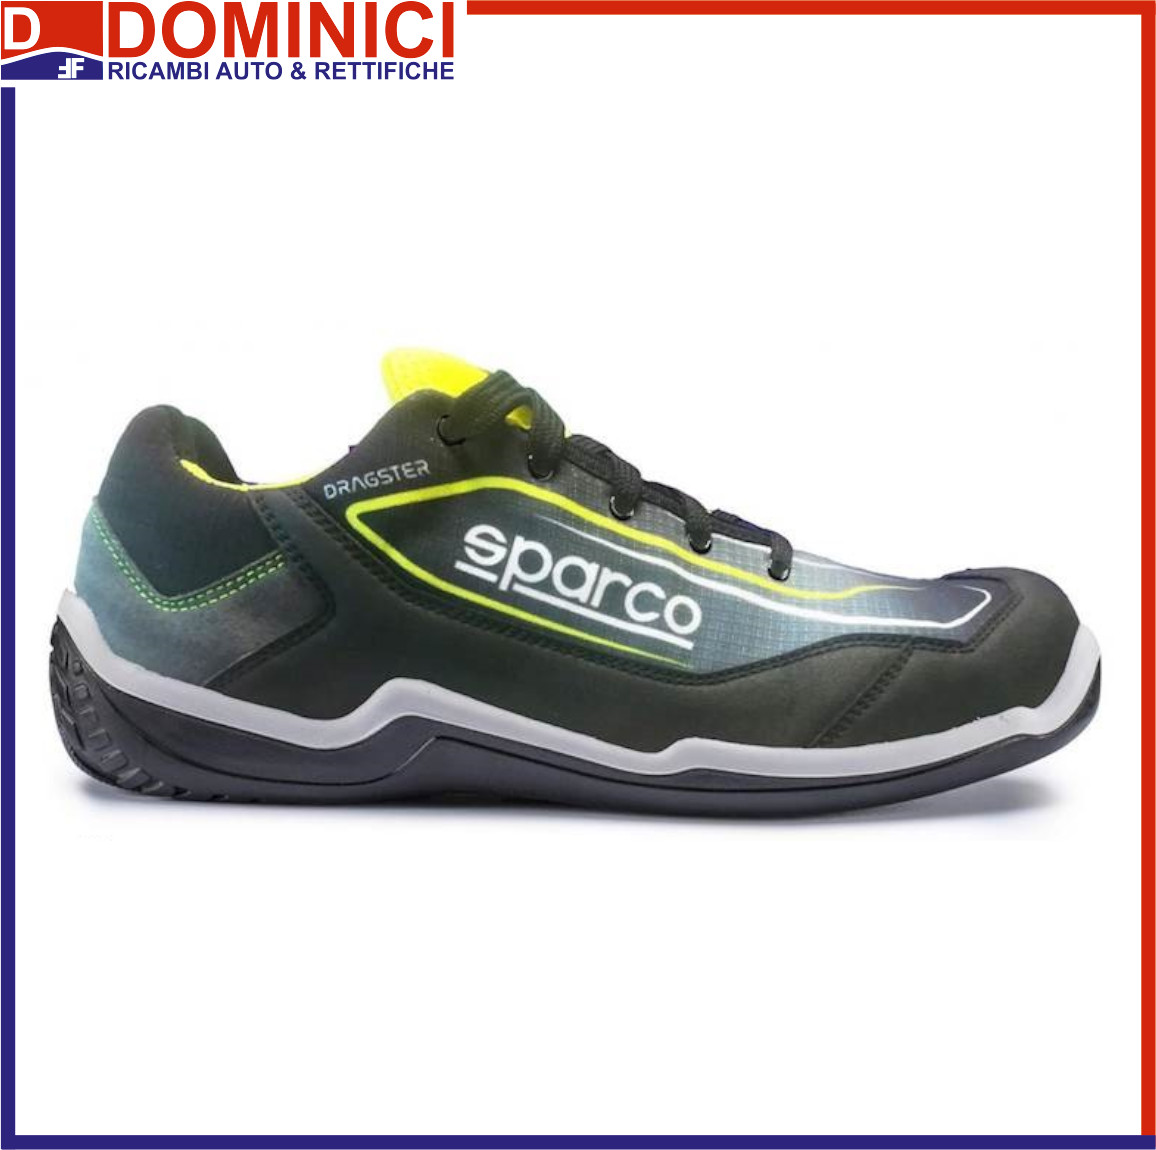 SPARCO - SPARCO SCARPA ANTINFORTUNISTICA S1P DRAGSTER NERO/GIALLO OUTLET -  SPARCO - Dominici Ricambi